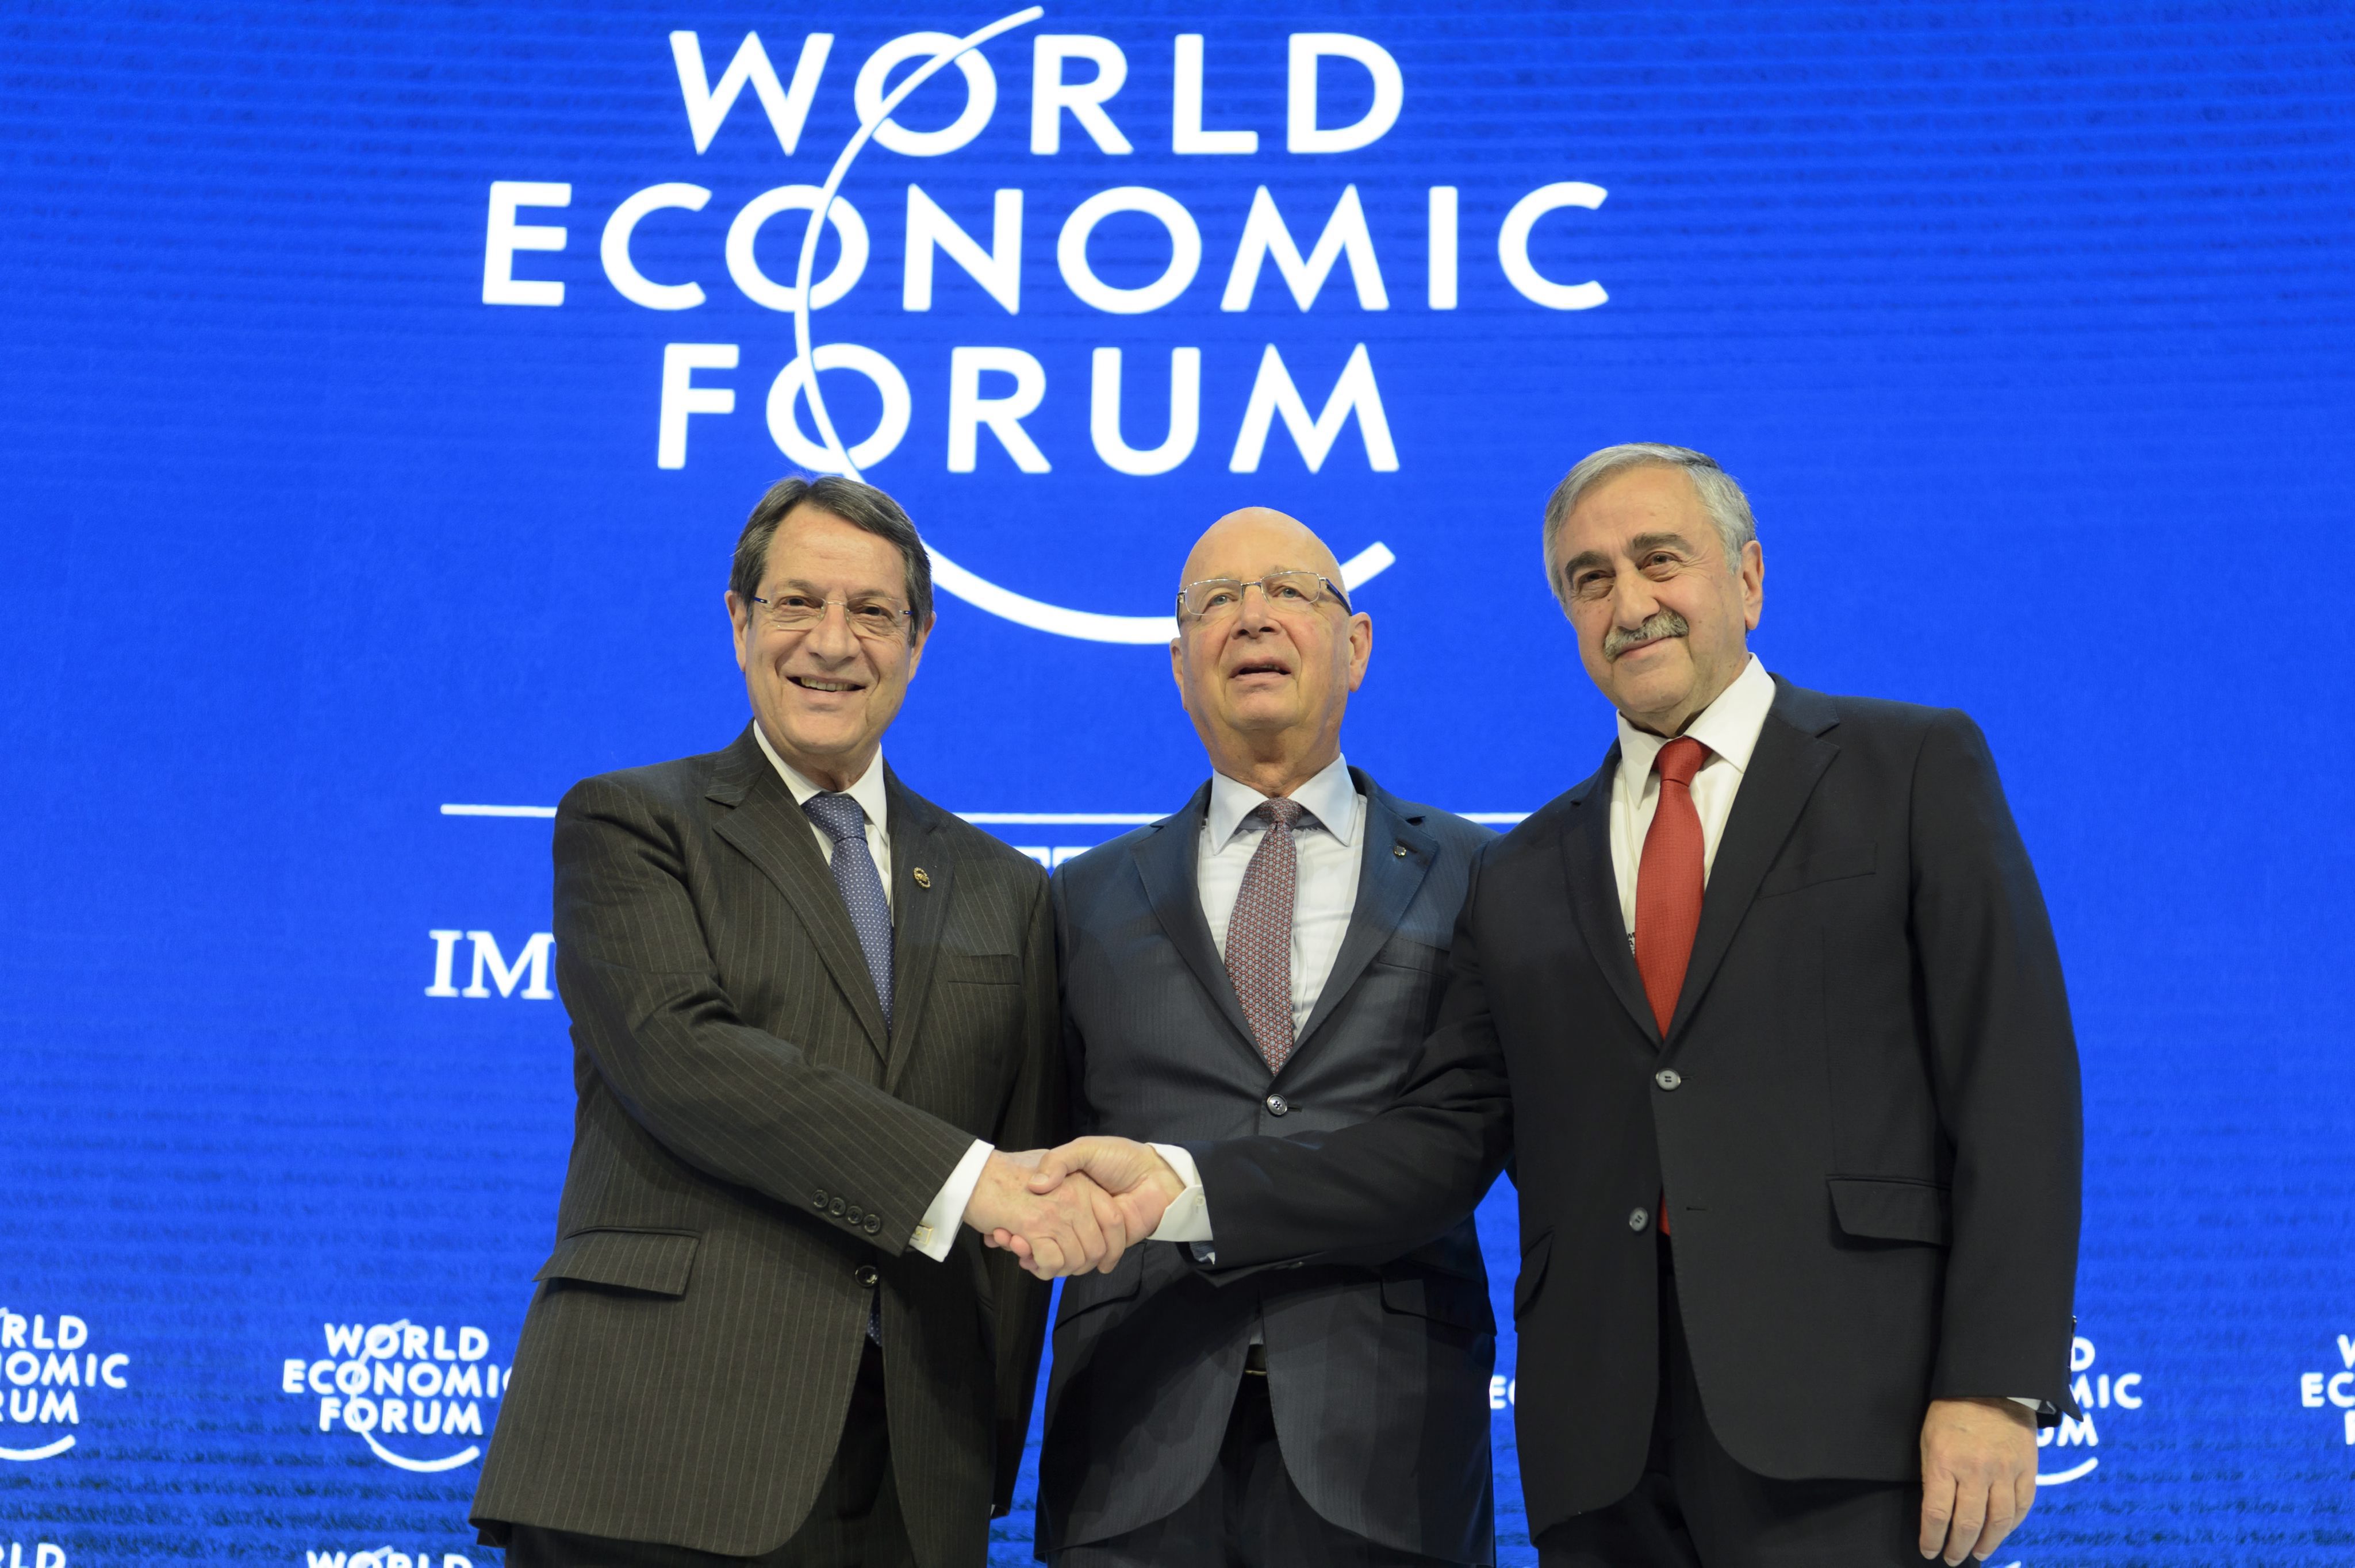 epa05115671 Nicos Anastasiades, (L), President of Cyprus shakes hands with Turkish Cypriot Leader Mustafa Akinci, (R), in front of German Klaus Schwab, (C), founder and president of the World Economic Forum, WEF, during a panel session during the 46th Annual Meeting of the World Economic Forum, WEF, in Davos, Switzerland, 21 January 2016. The overarching theme of the Meeting, which takes place from 20 to 23 January, is 'Mastering the Fourth Industrial Revolution.' EPA/LAURENT GILLIERON